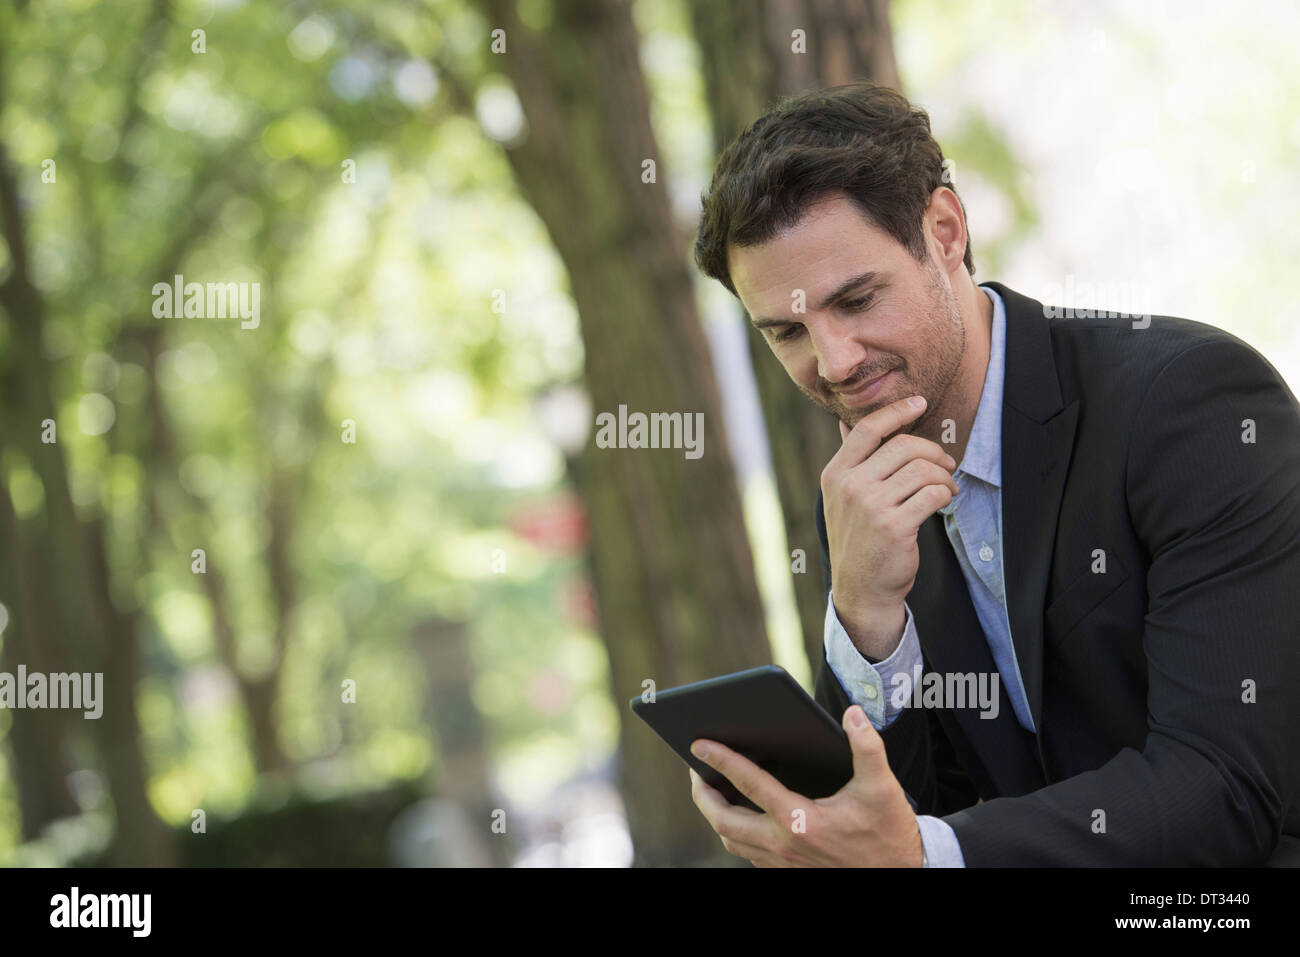 A man sitting in a park using his digital tablet Stock Photo